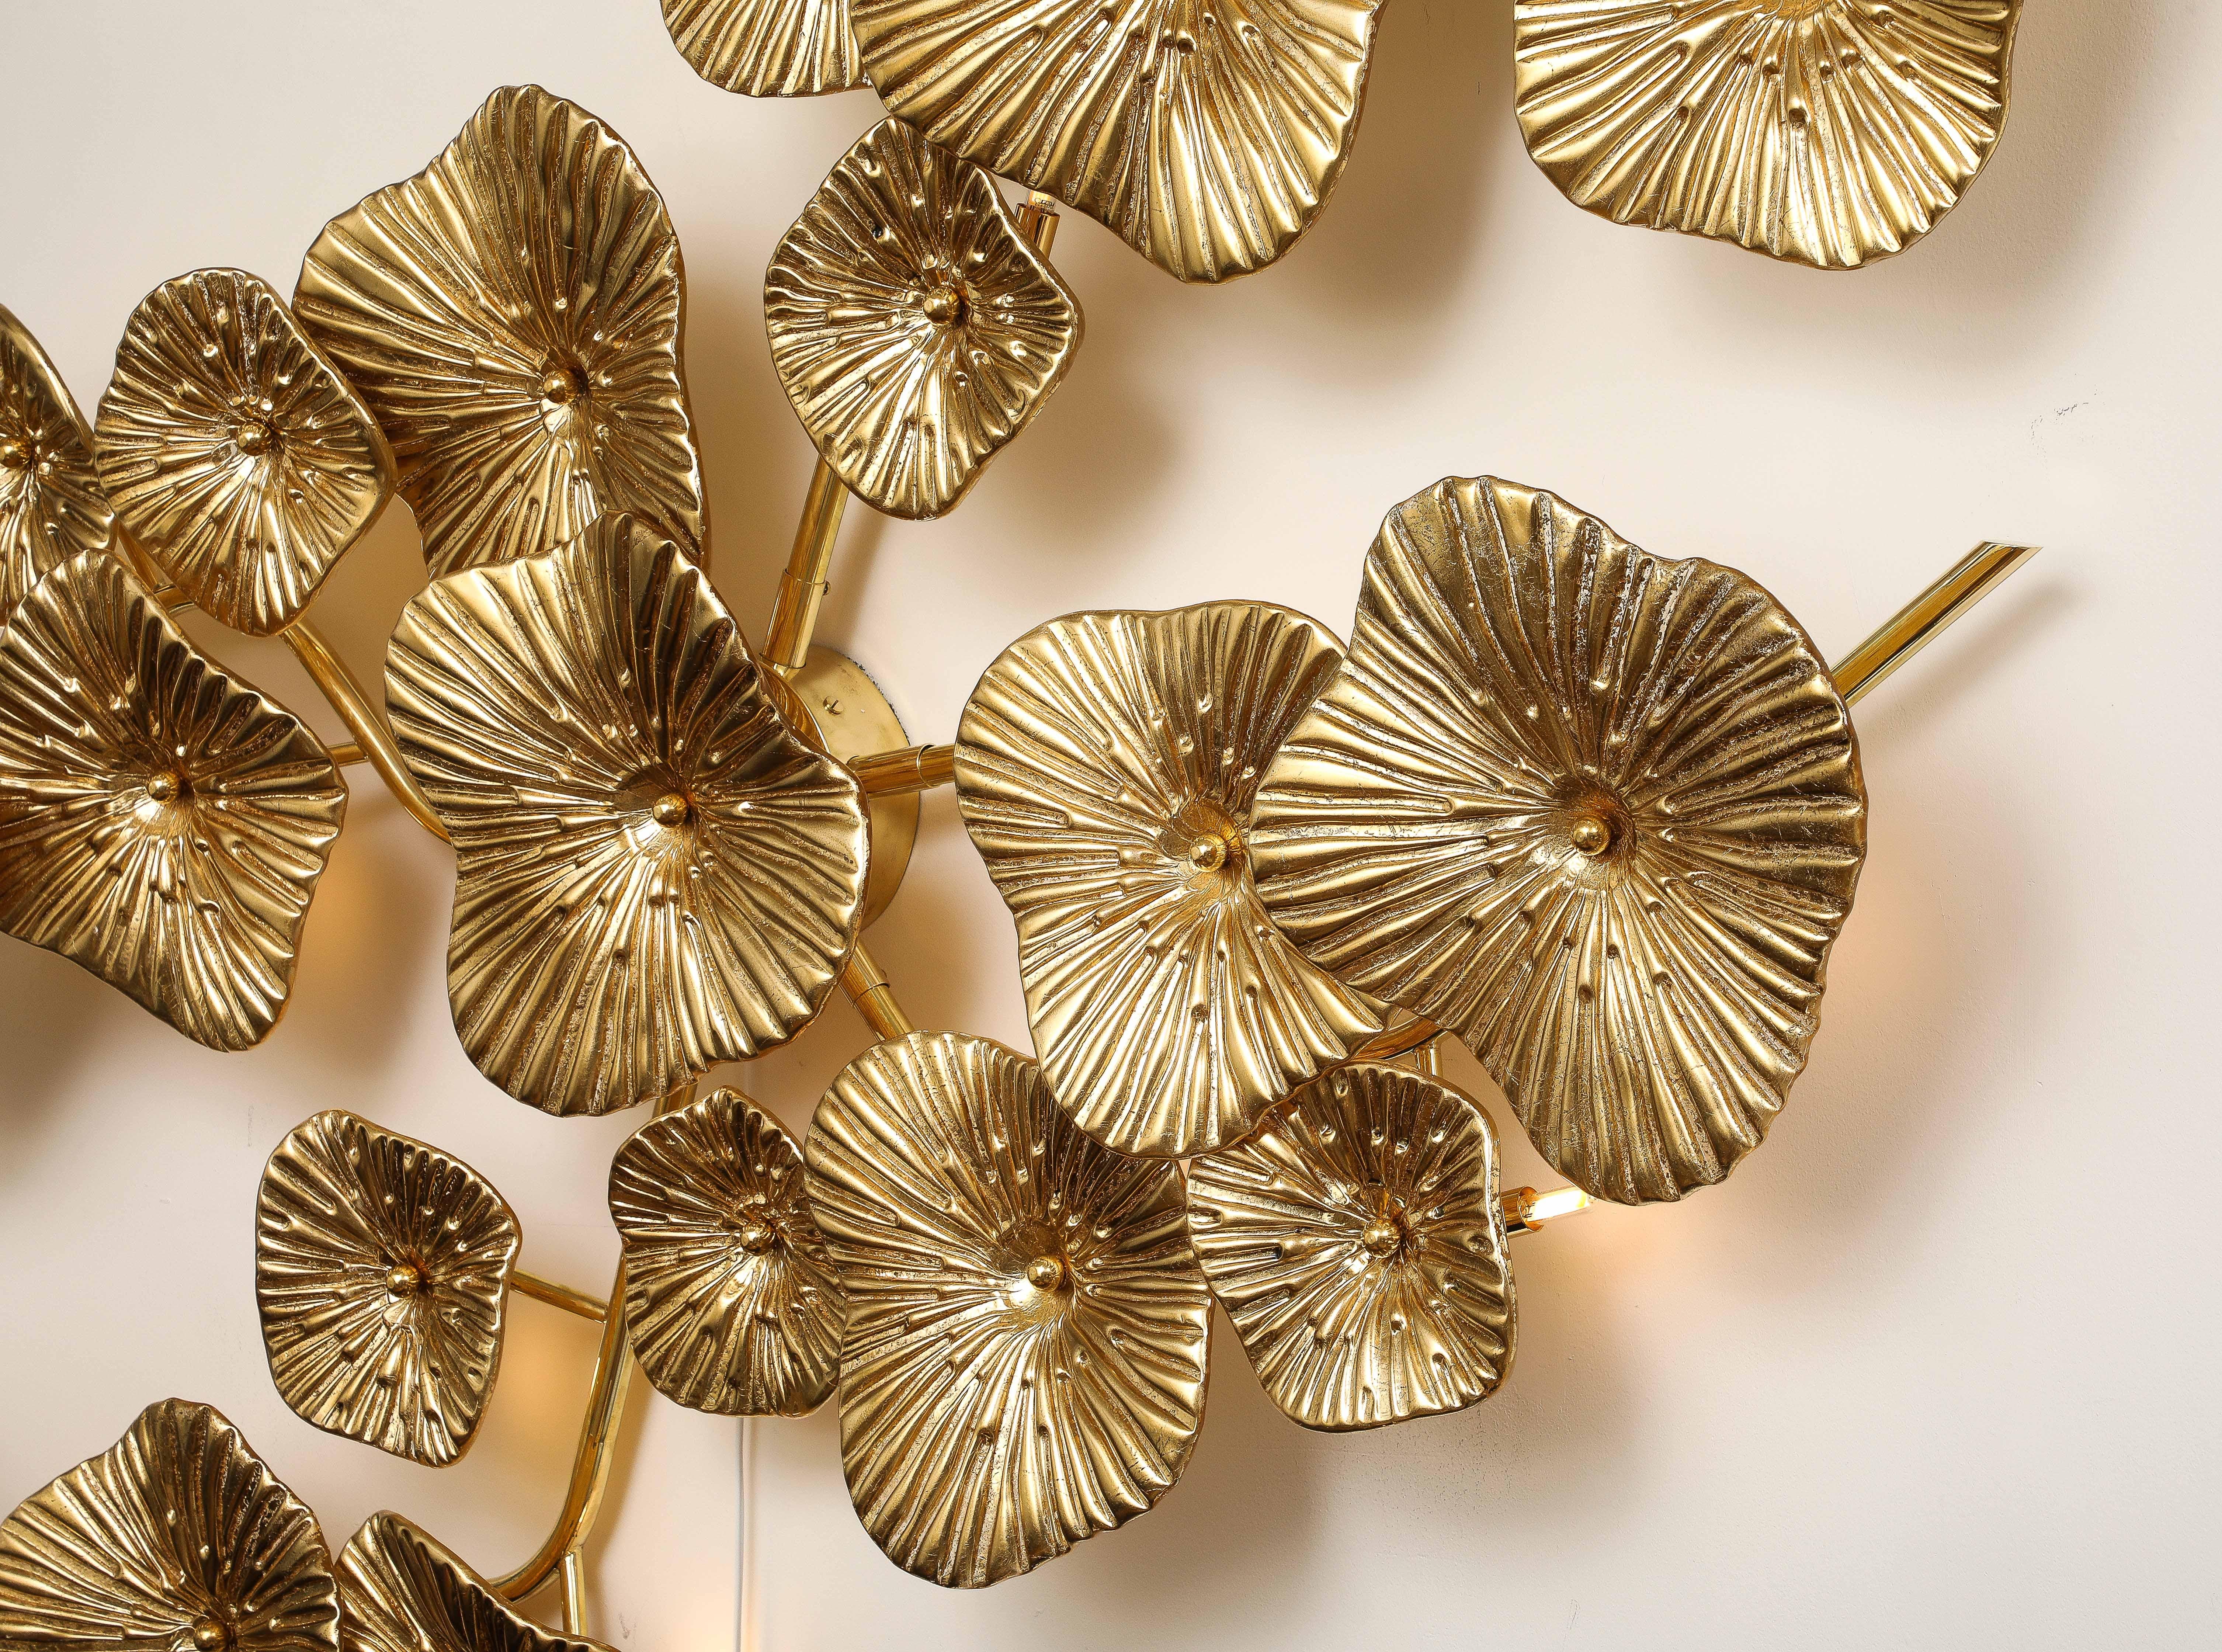 Very Large and unique Gold Leaf Murano glass flowers sconce or wall art with brass frame. Hand-casted and formed Murano glass flowers with hand-applied, 24k gold leaf on reverse of glass are attached with a brass caps to brass stems. The Murano